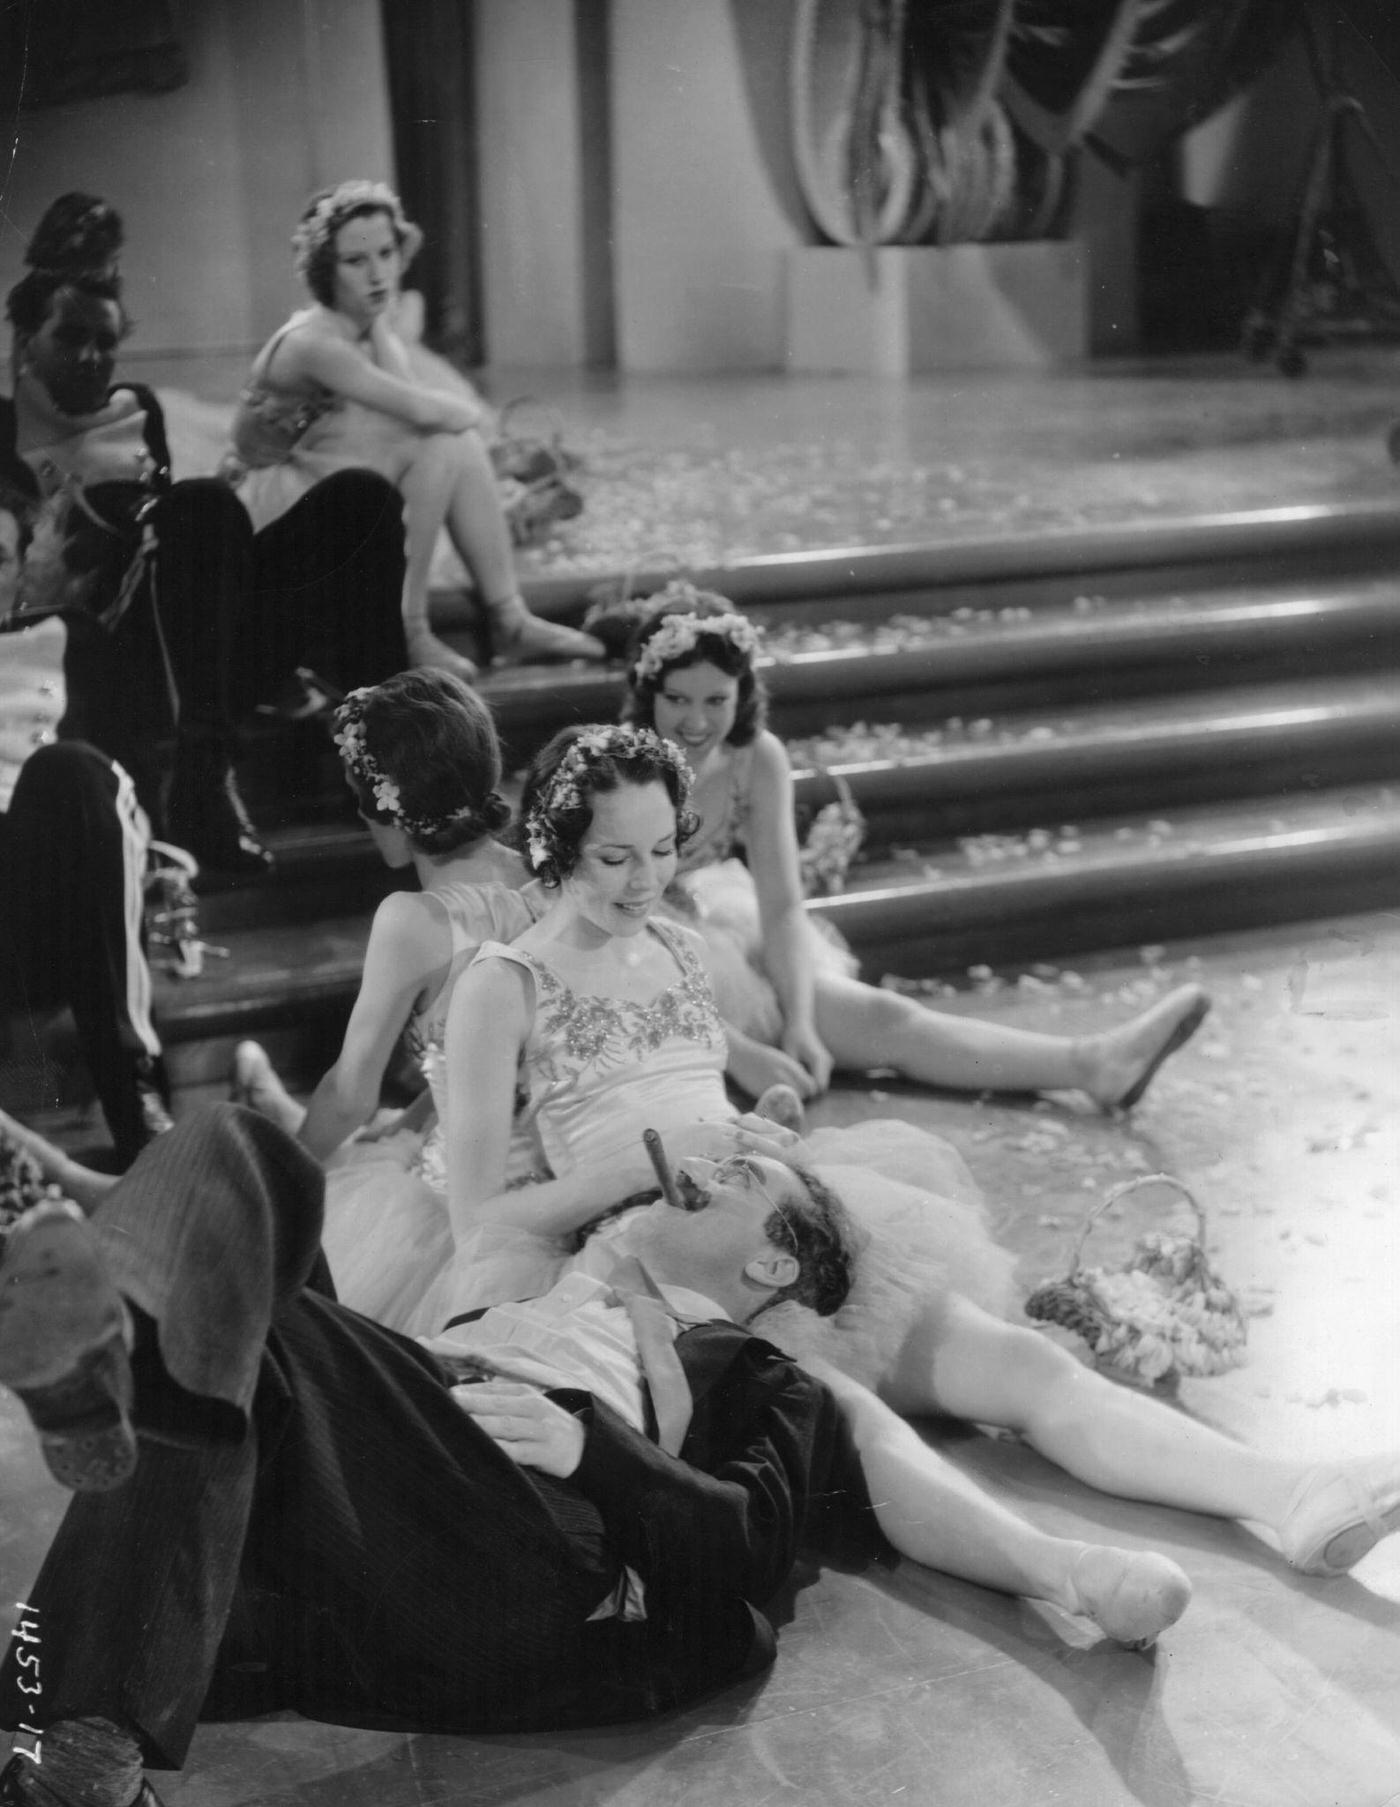 Groucho Marx finds himself surrounded by young beauties in a scene from Duck Soup (1933).